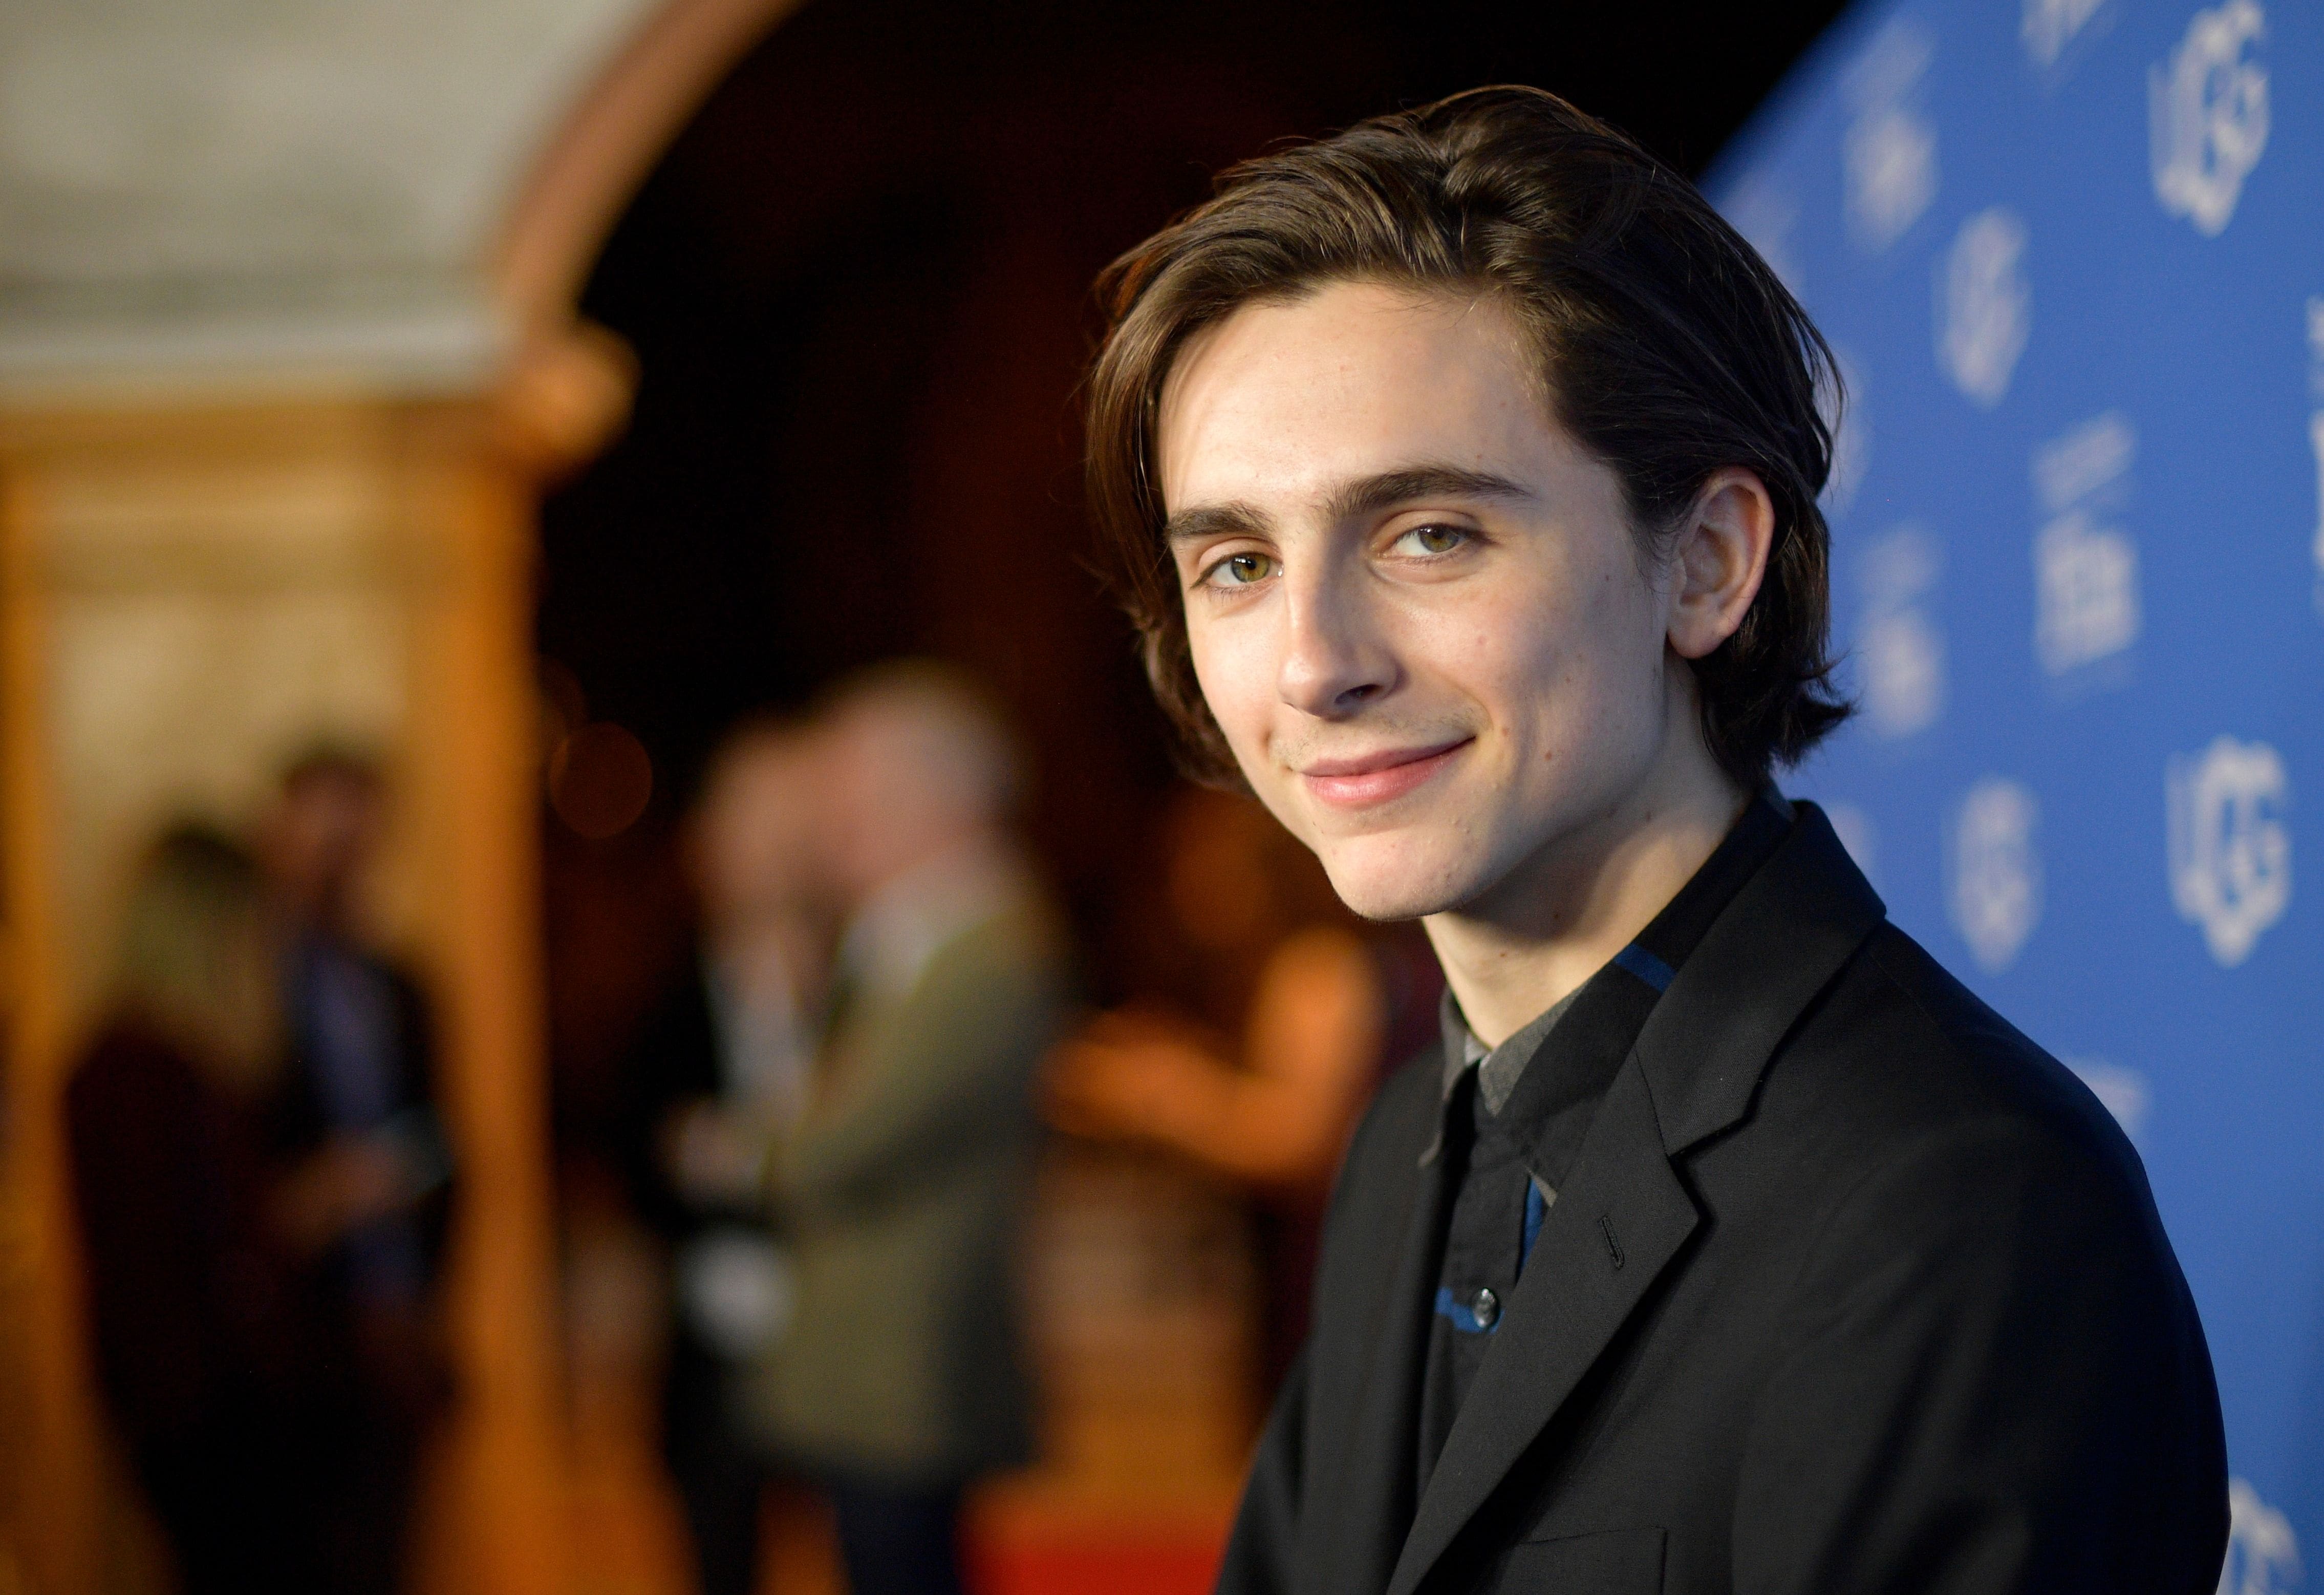 A young man in black suit and tie - Timothee Chalamet